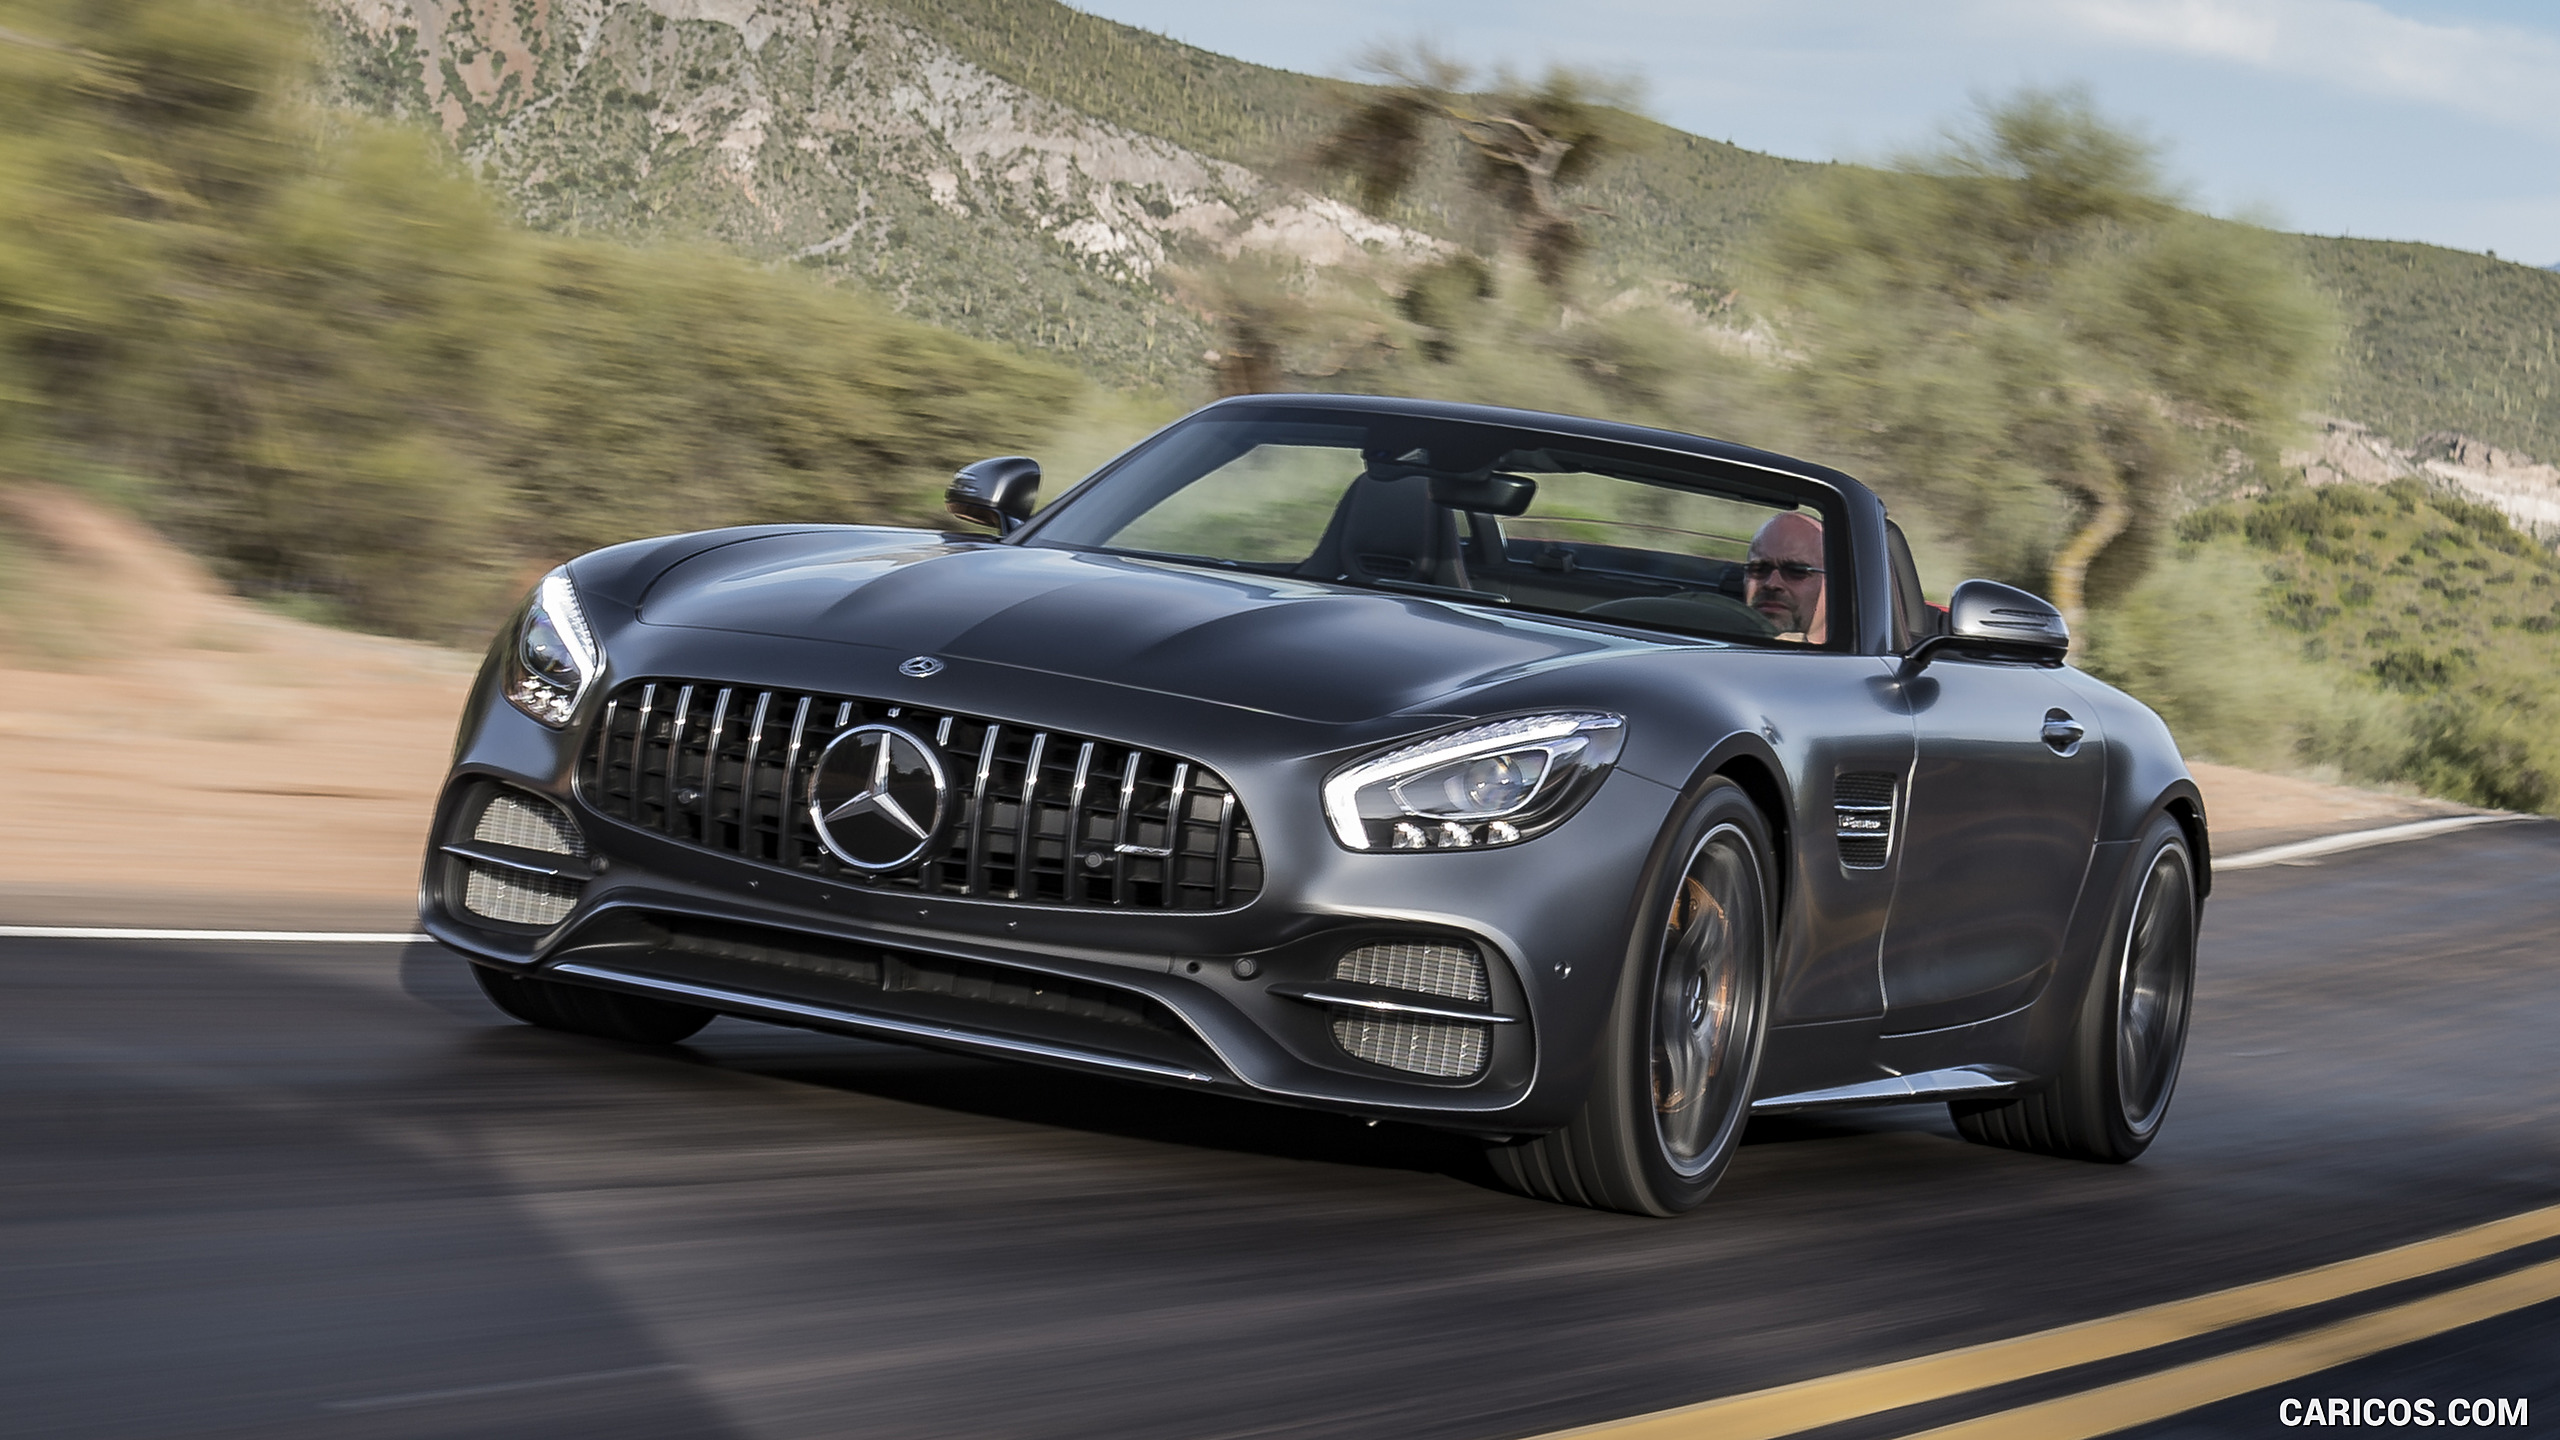 2018 Mercedes-AMG GT C Roadster - Front Three-Quarter, #288 of 350